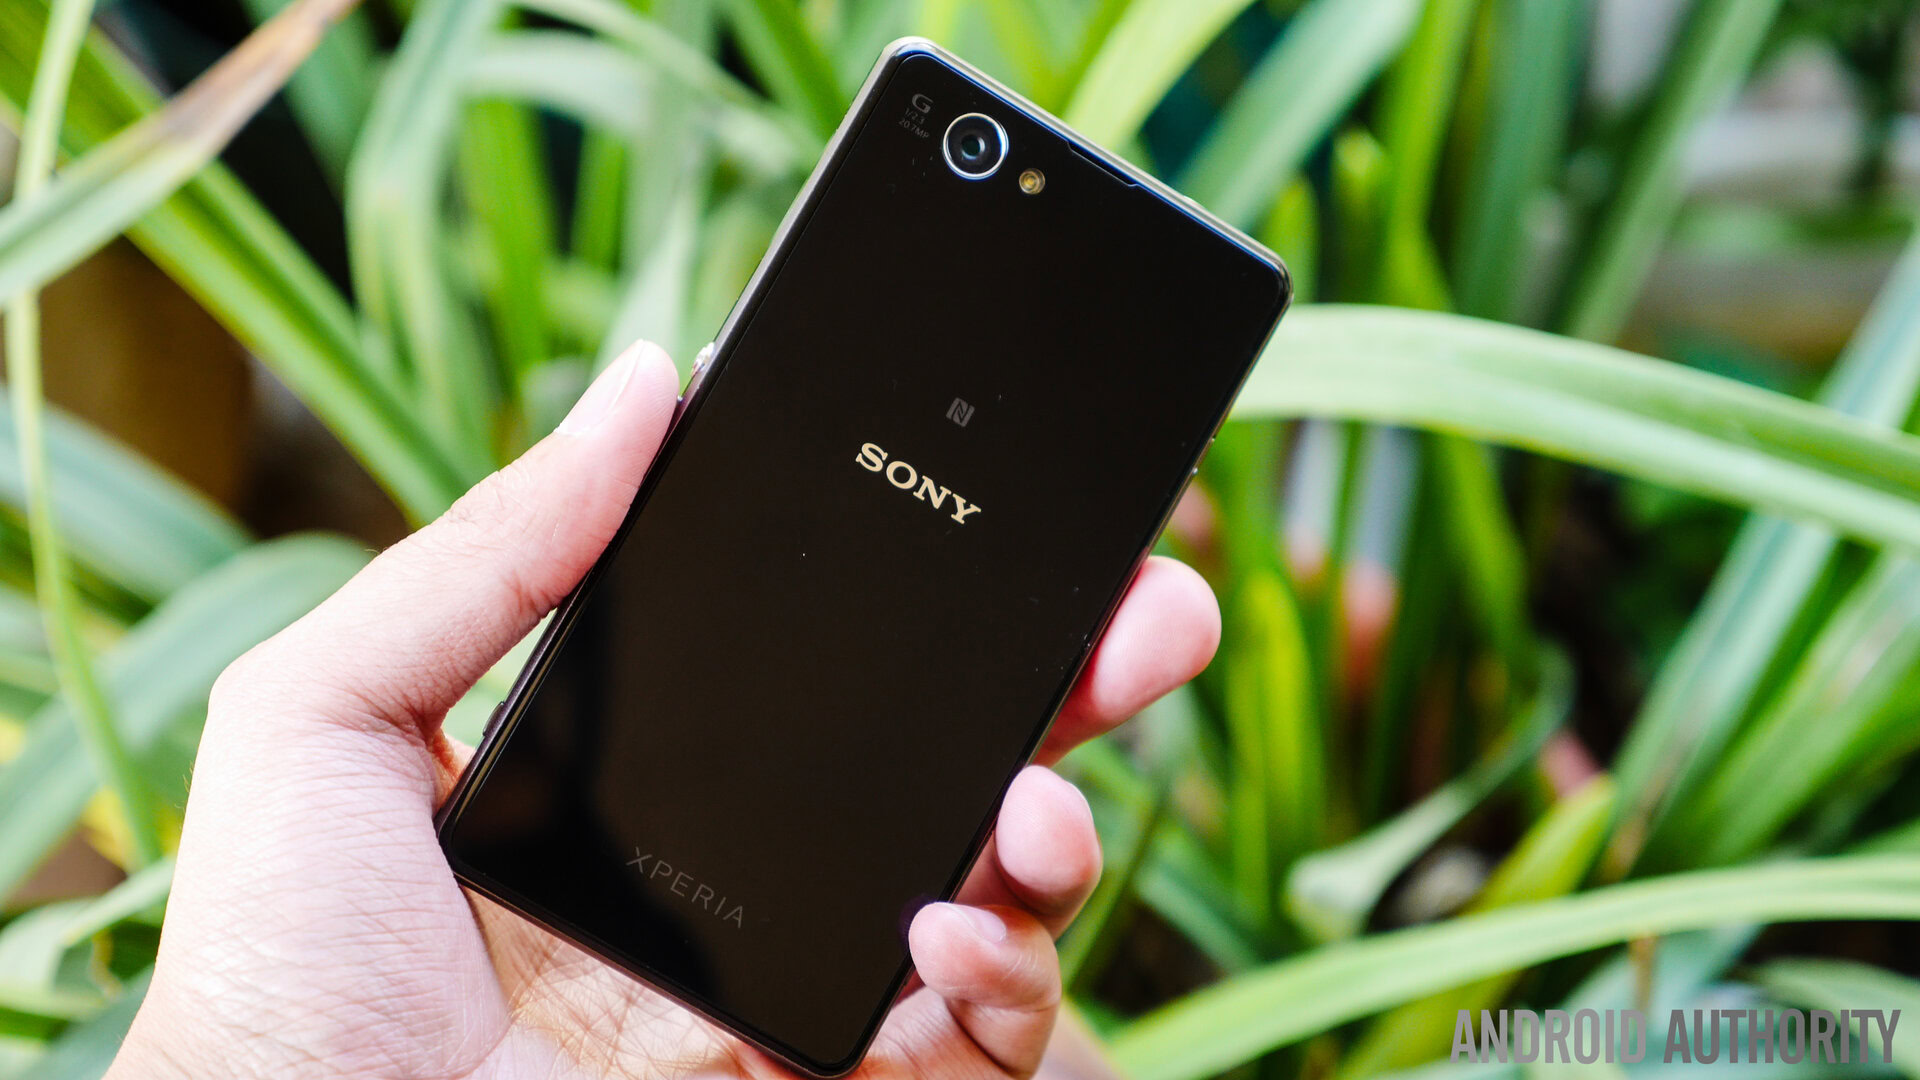 Apk dwnld sony xperia z1 compact android 9 bomber lava kkt29